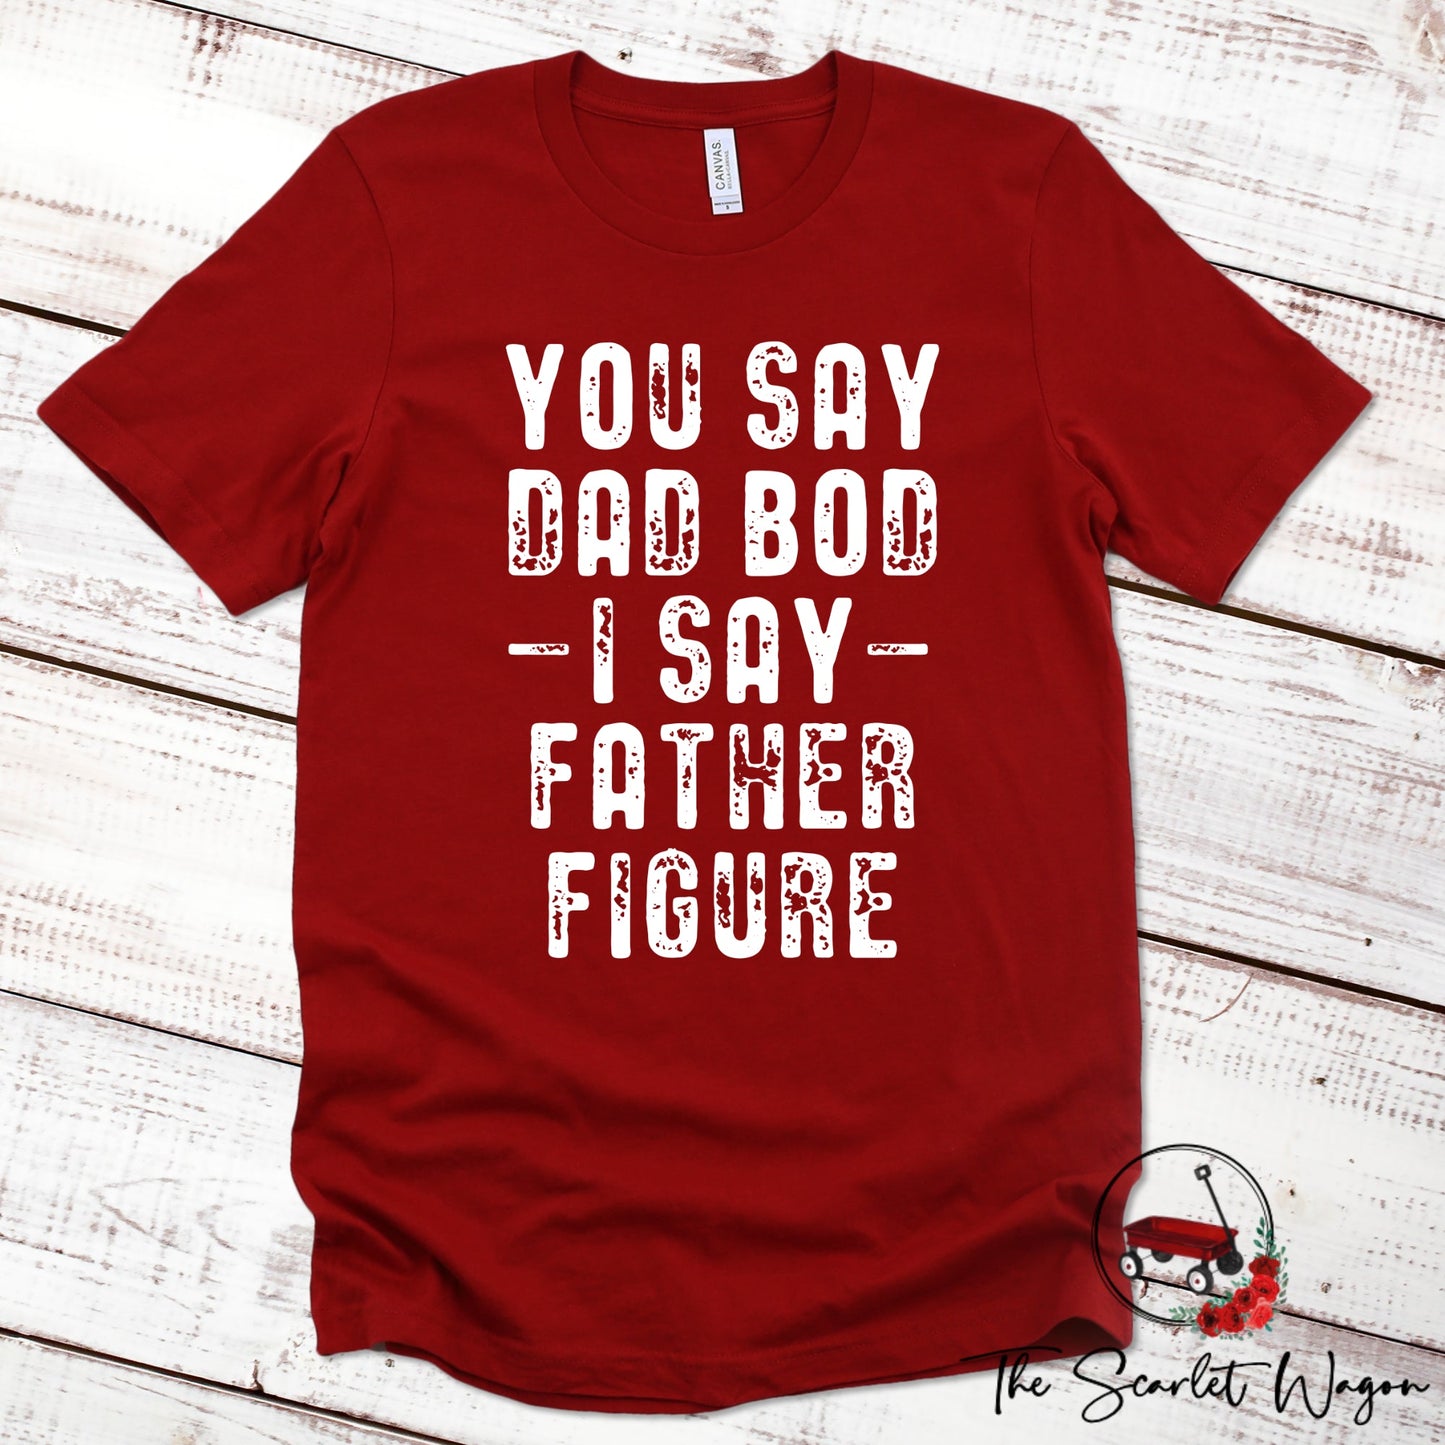 You Say Dad Bod I Say Father Figure Premium Tee Scarlet Wagon Red XS 